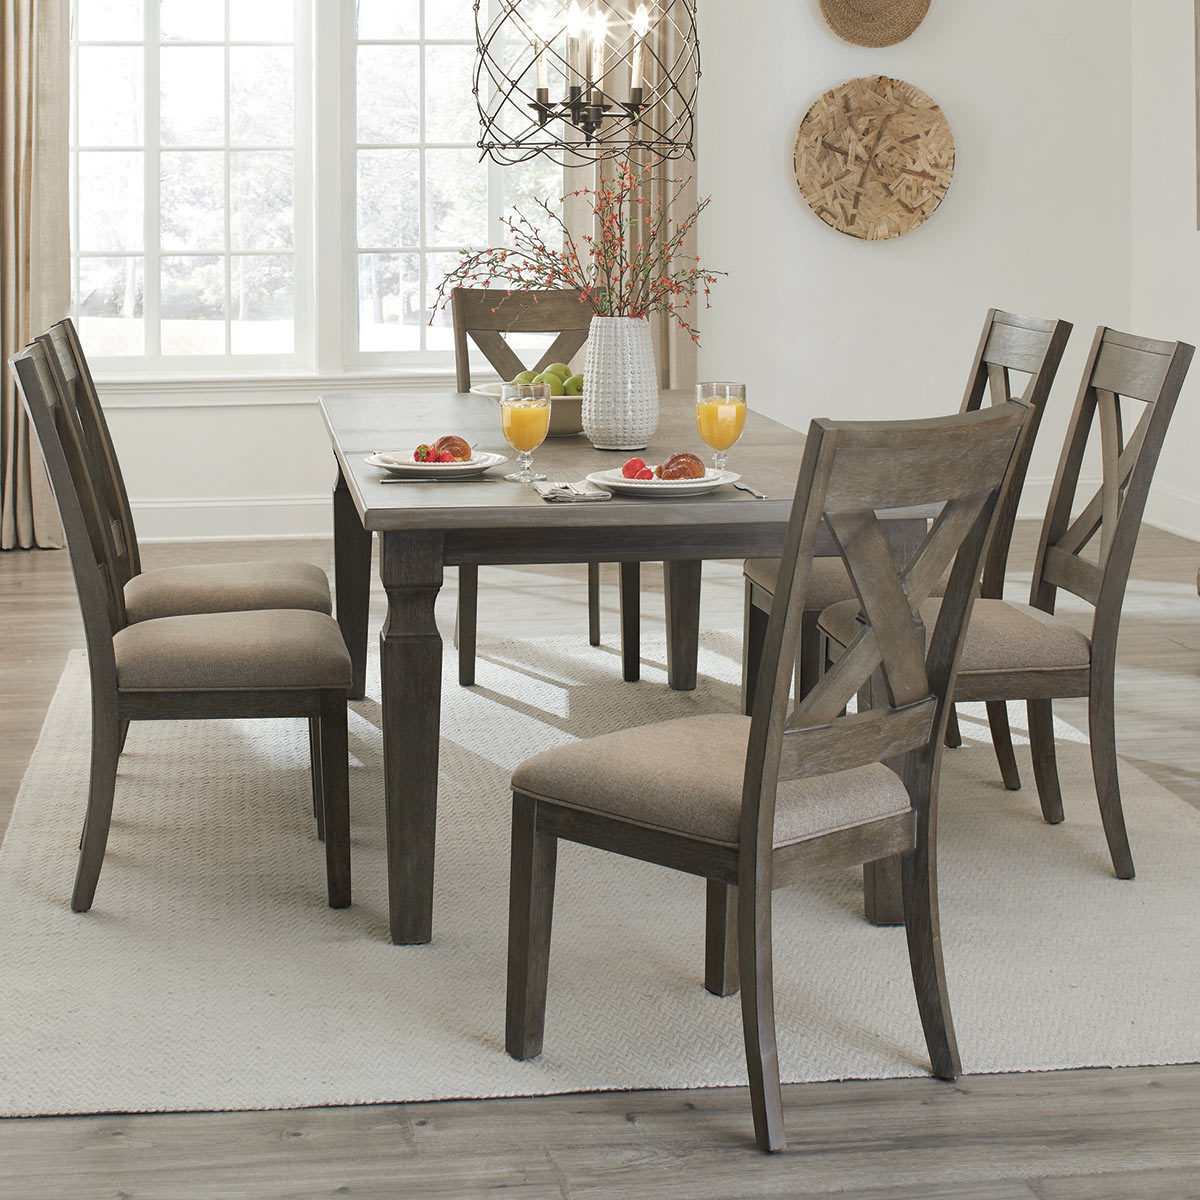 Universal Furniture Eileen Extending Dining Room Table + 6 Chairs